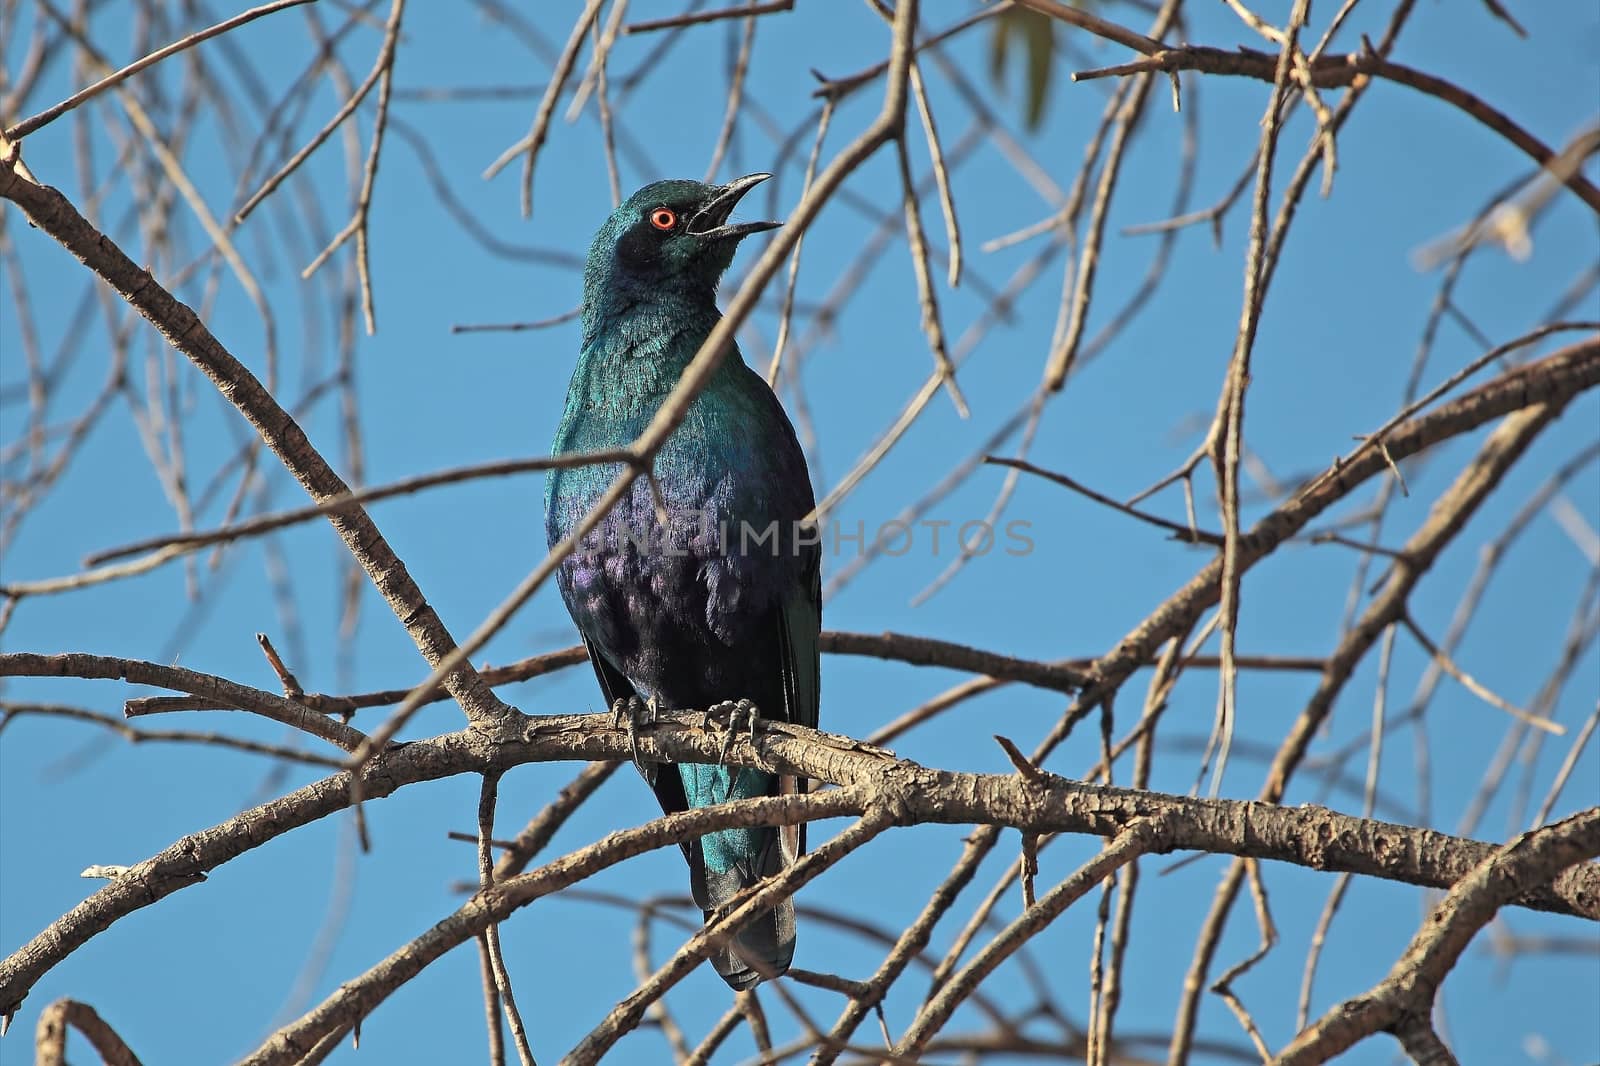 A Greater Blue-eared Glossy-Starling (Lamprotornis chalybaeus) in the Ethiopian Mountains.